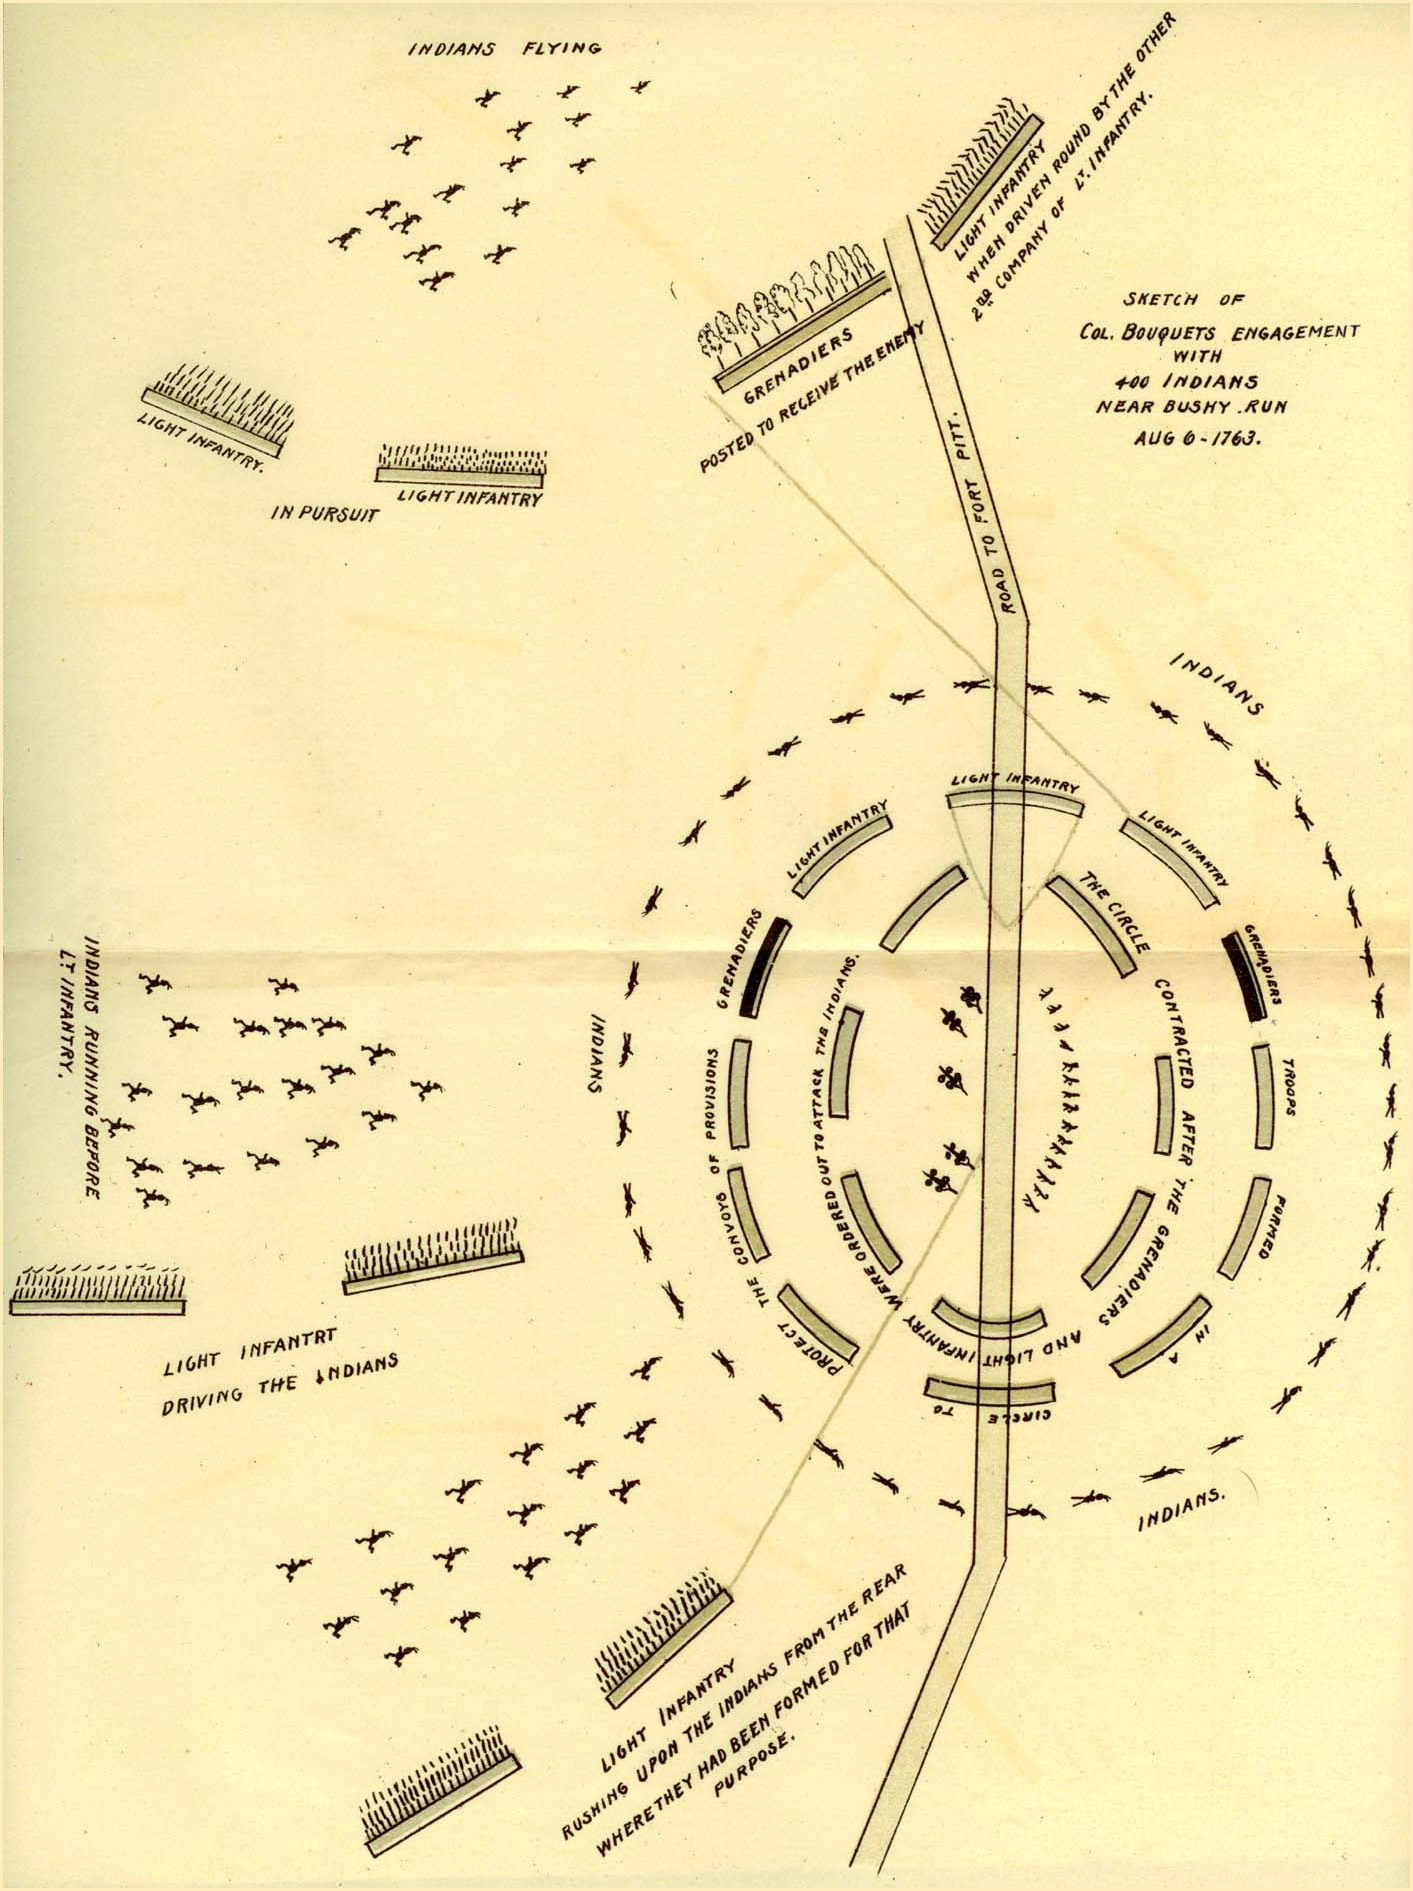 Plan of the Battle of Bushy Run, fought on August 5-6, 1763